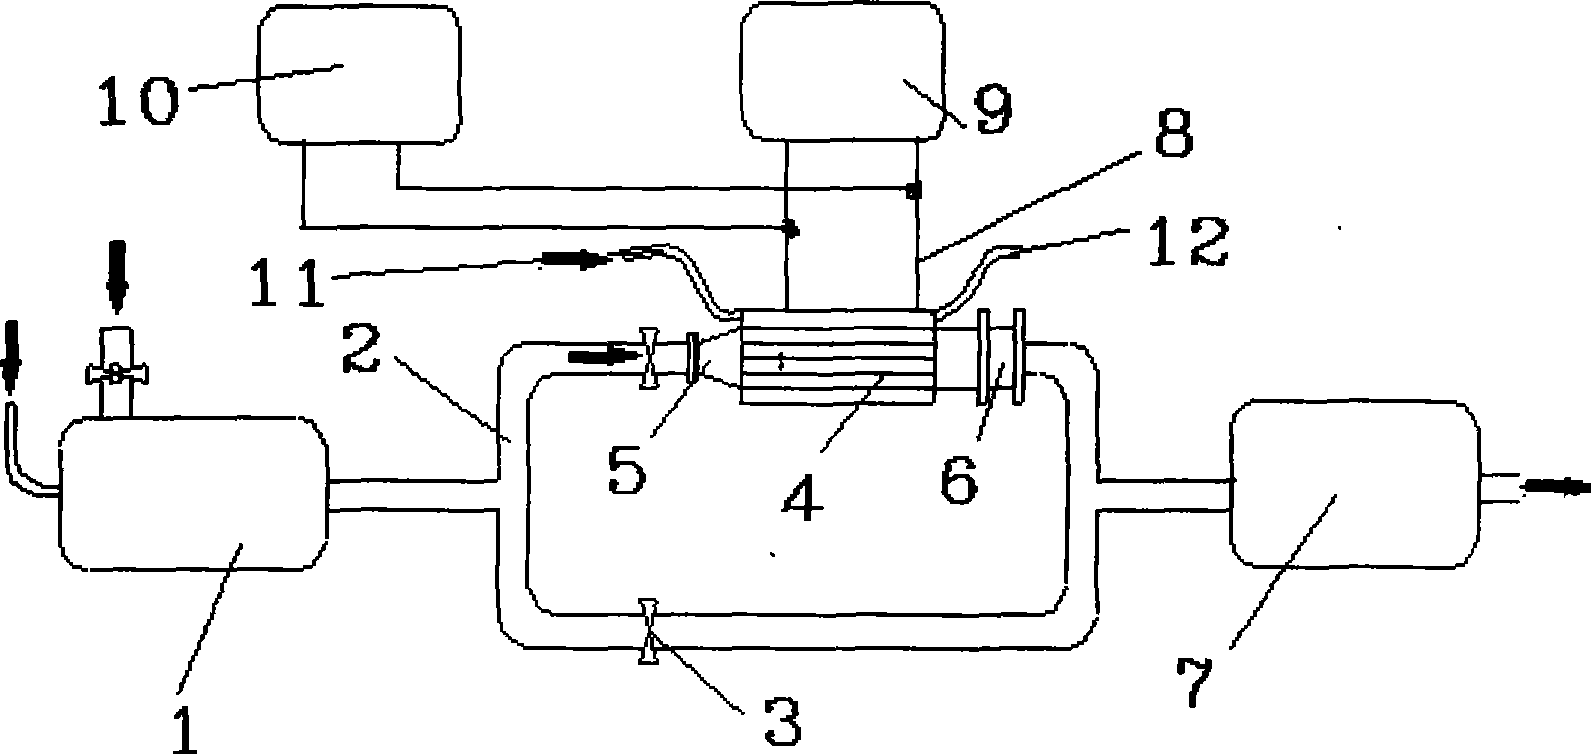 Residue heat temperature difference electricity conversion power generation system for internal combustion engine